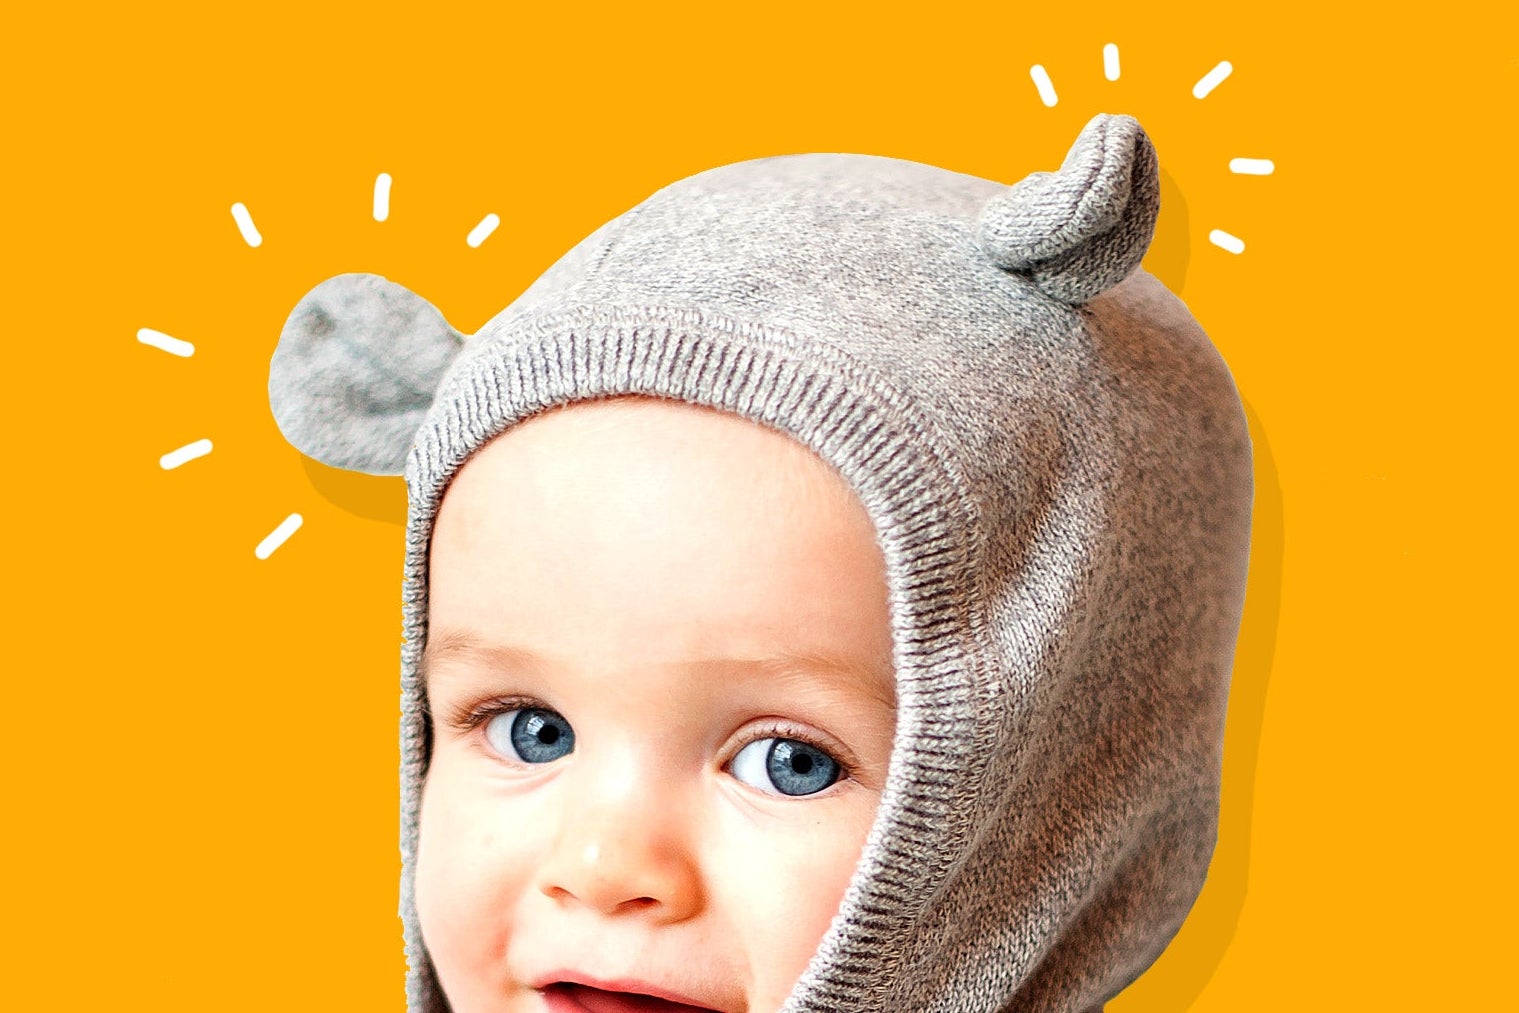 Animal hats and clothes for kids: When did it become cute to transform  children into animals?